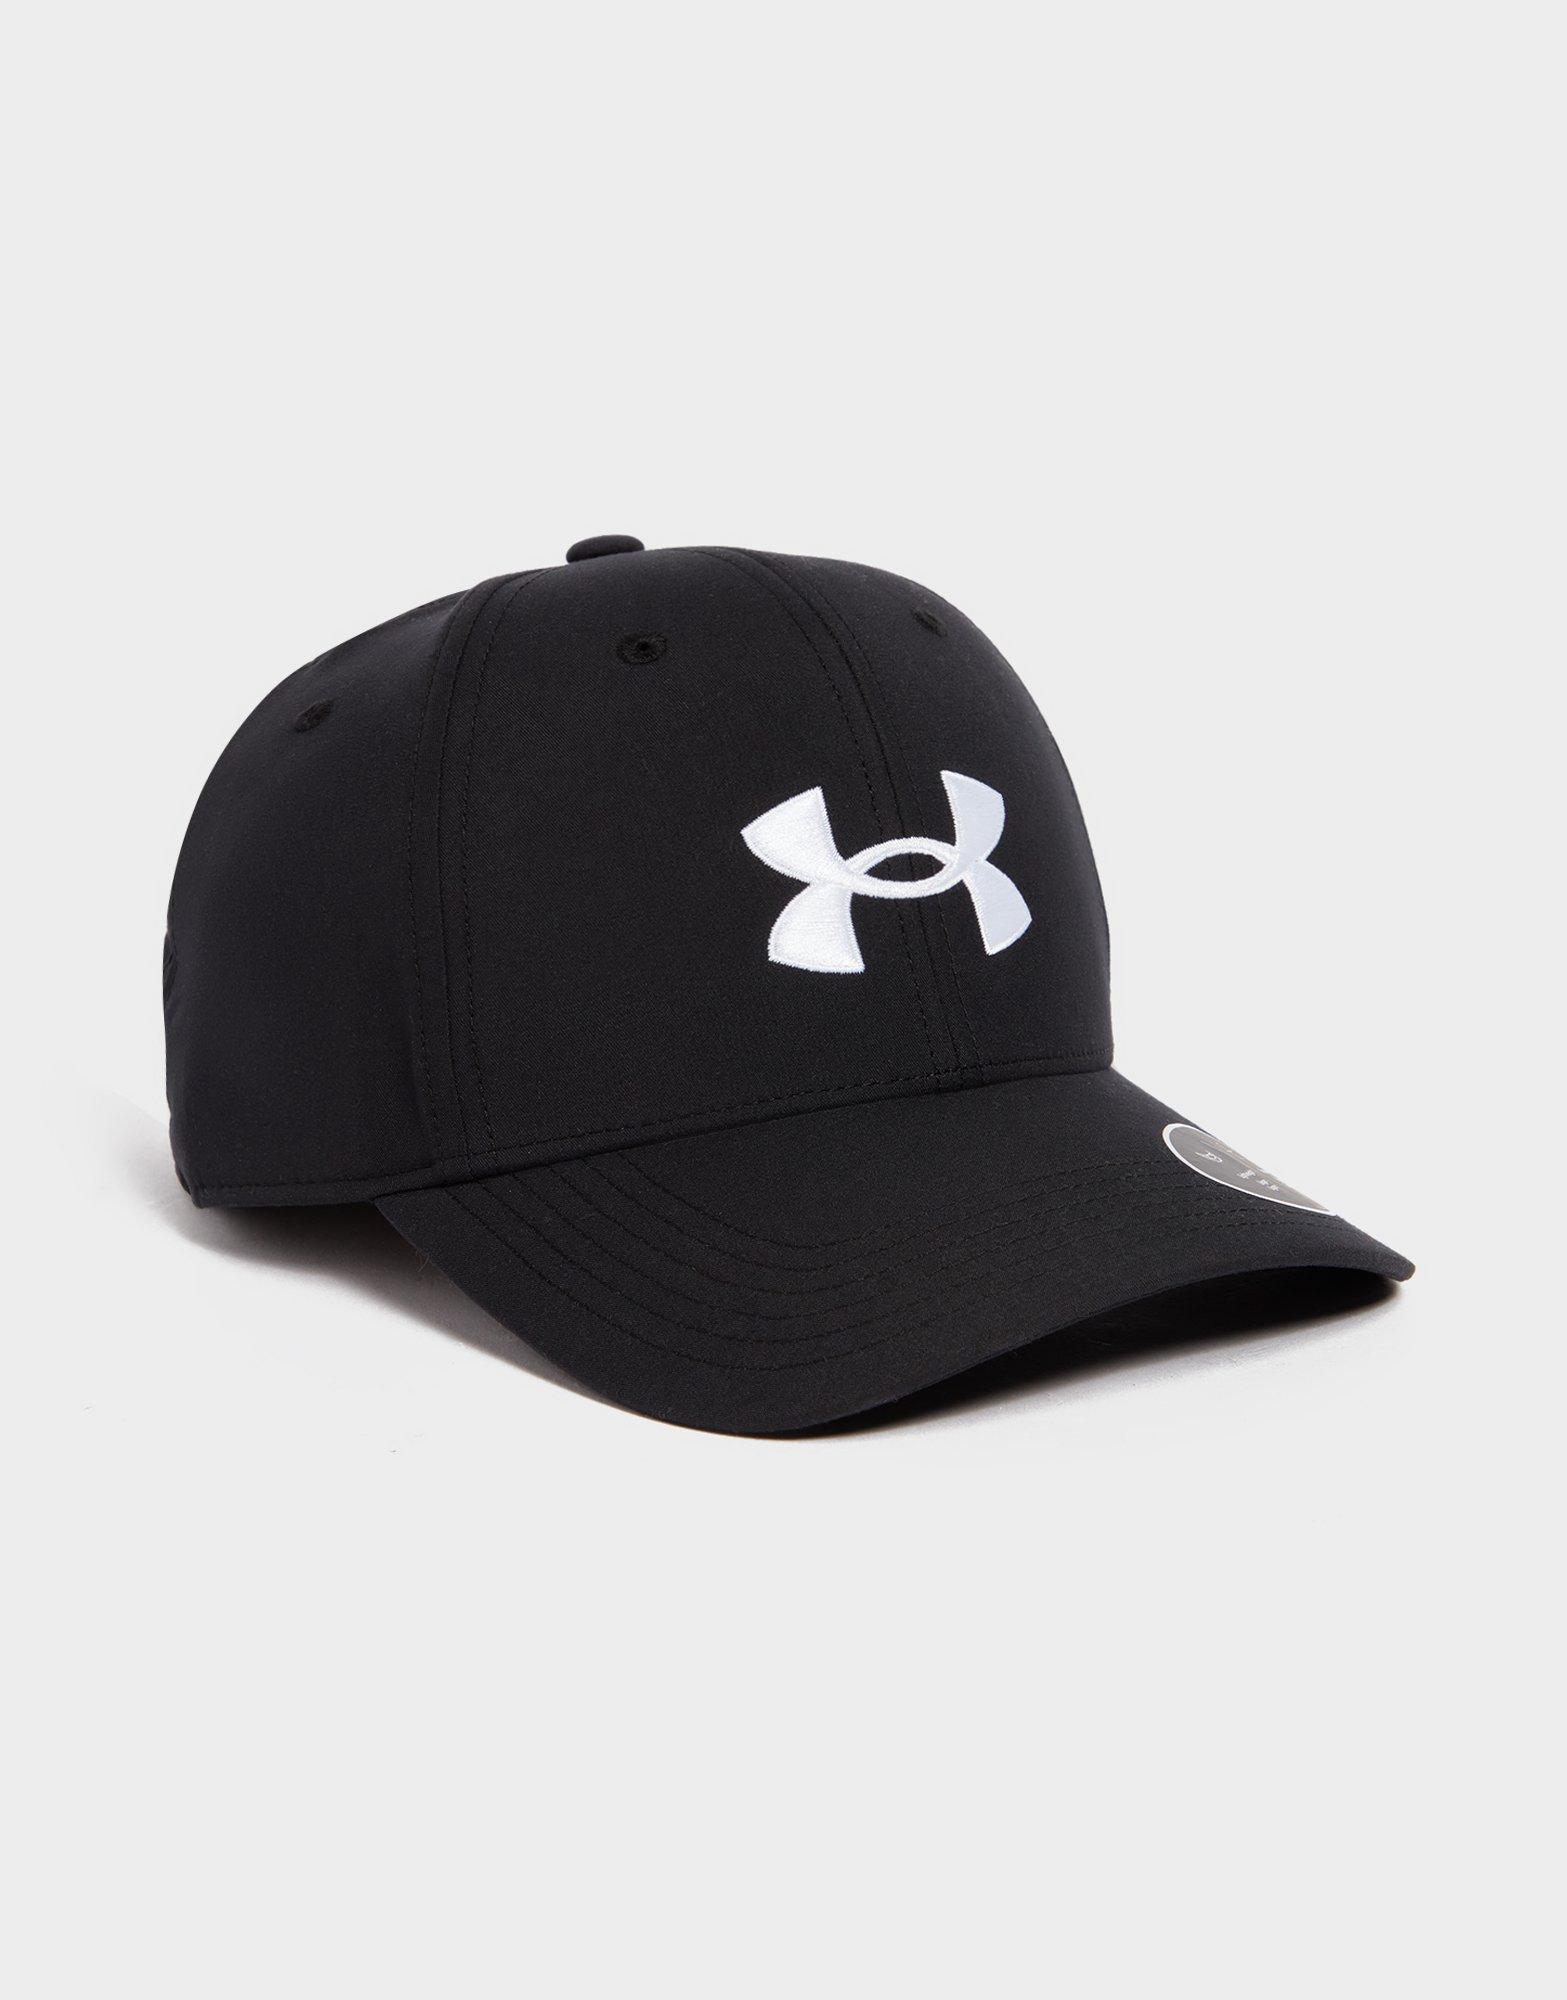 Under Armour Golf96 Hat, Black (001)/White, One Size Fits Most at   Men's Clothing store